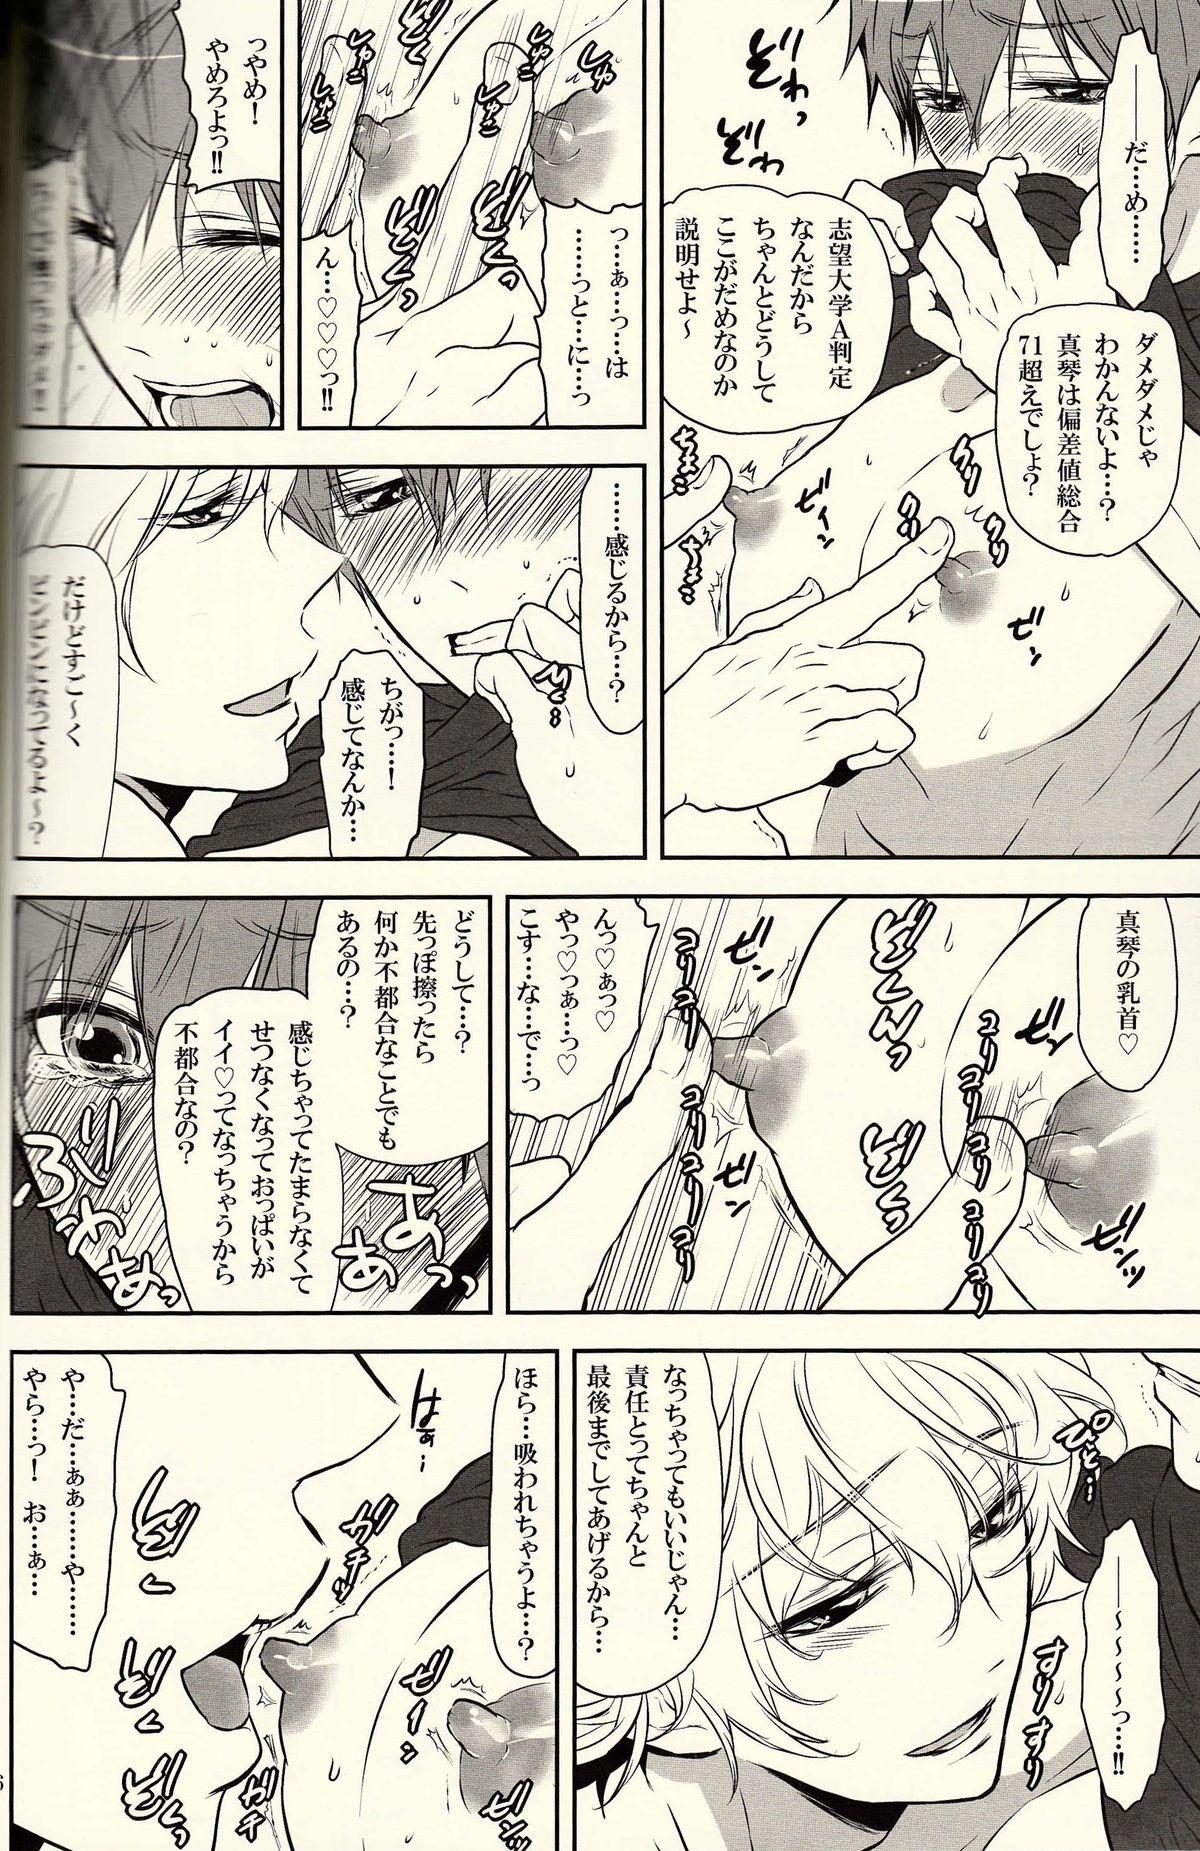 Cowgirl Danshi Hensachi 70 Medley Relay - Free Farting - Page 5